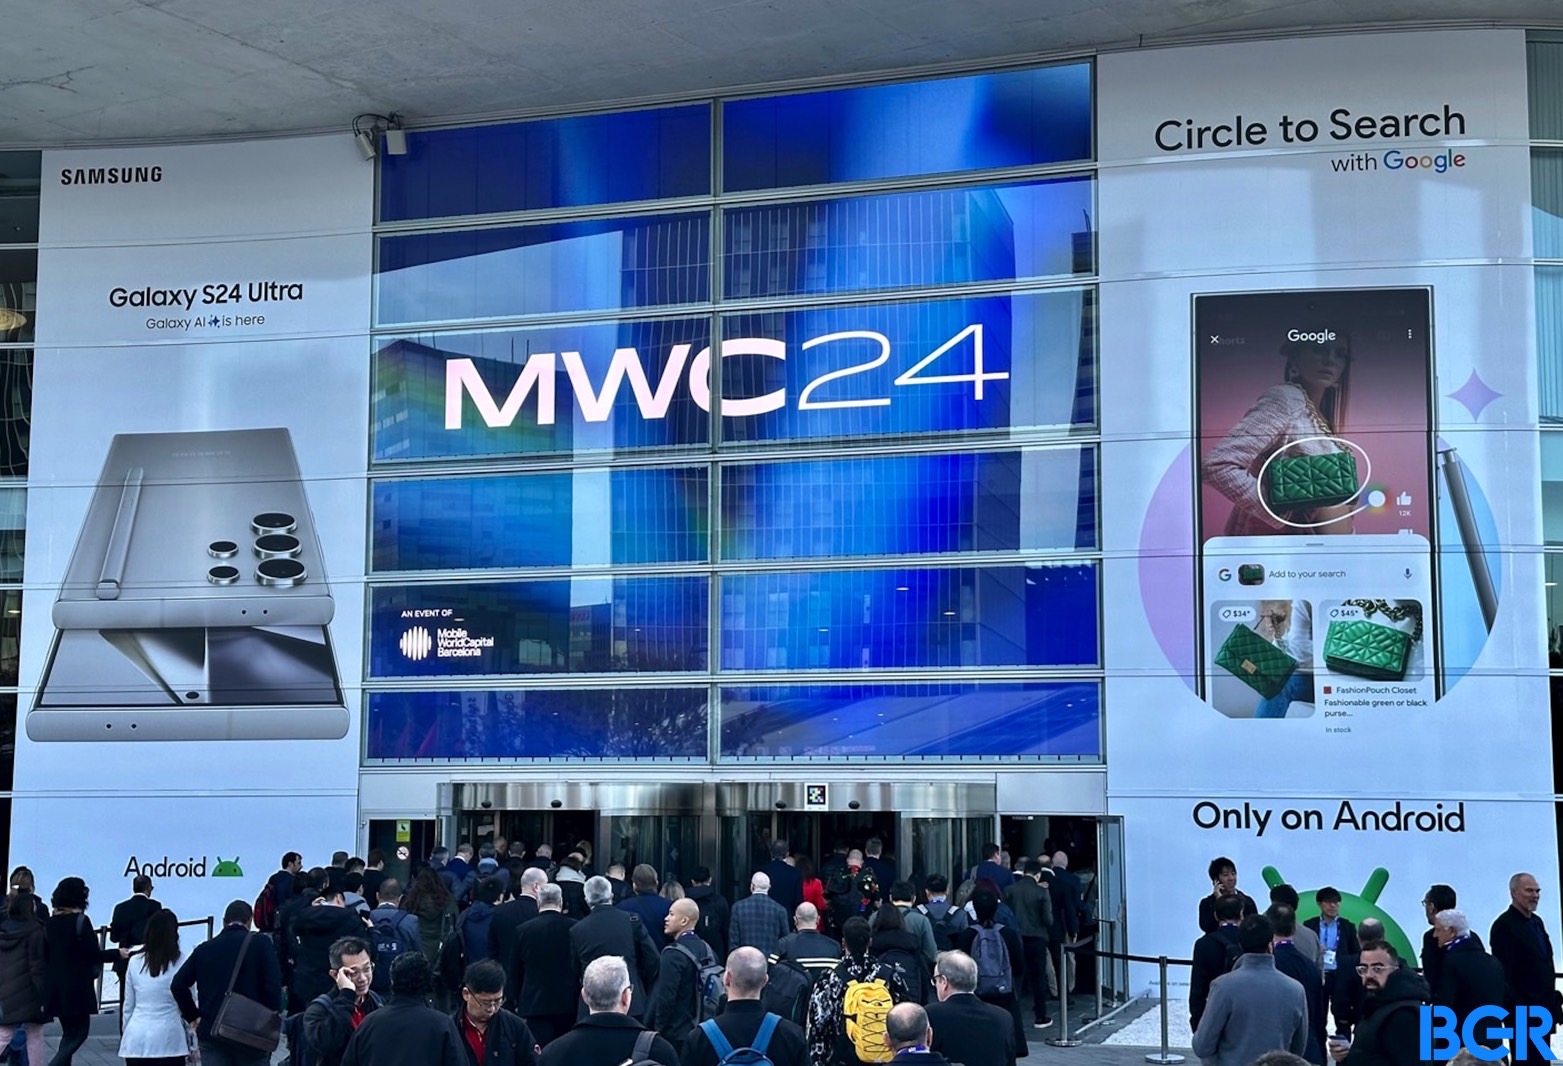 Galaxy S24 signage dominating the MWC 2024 entrance.